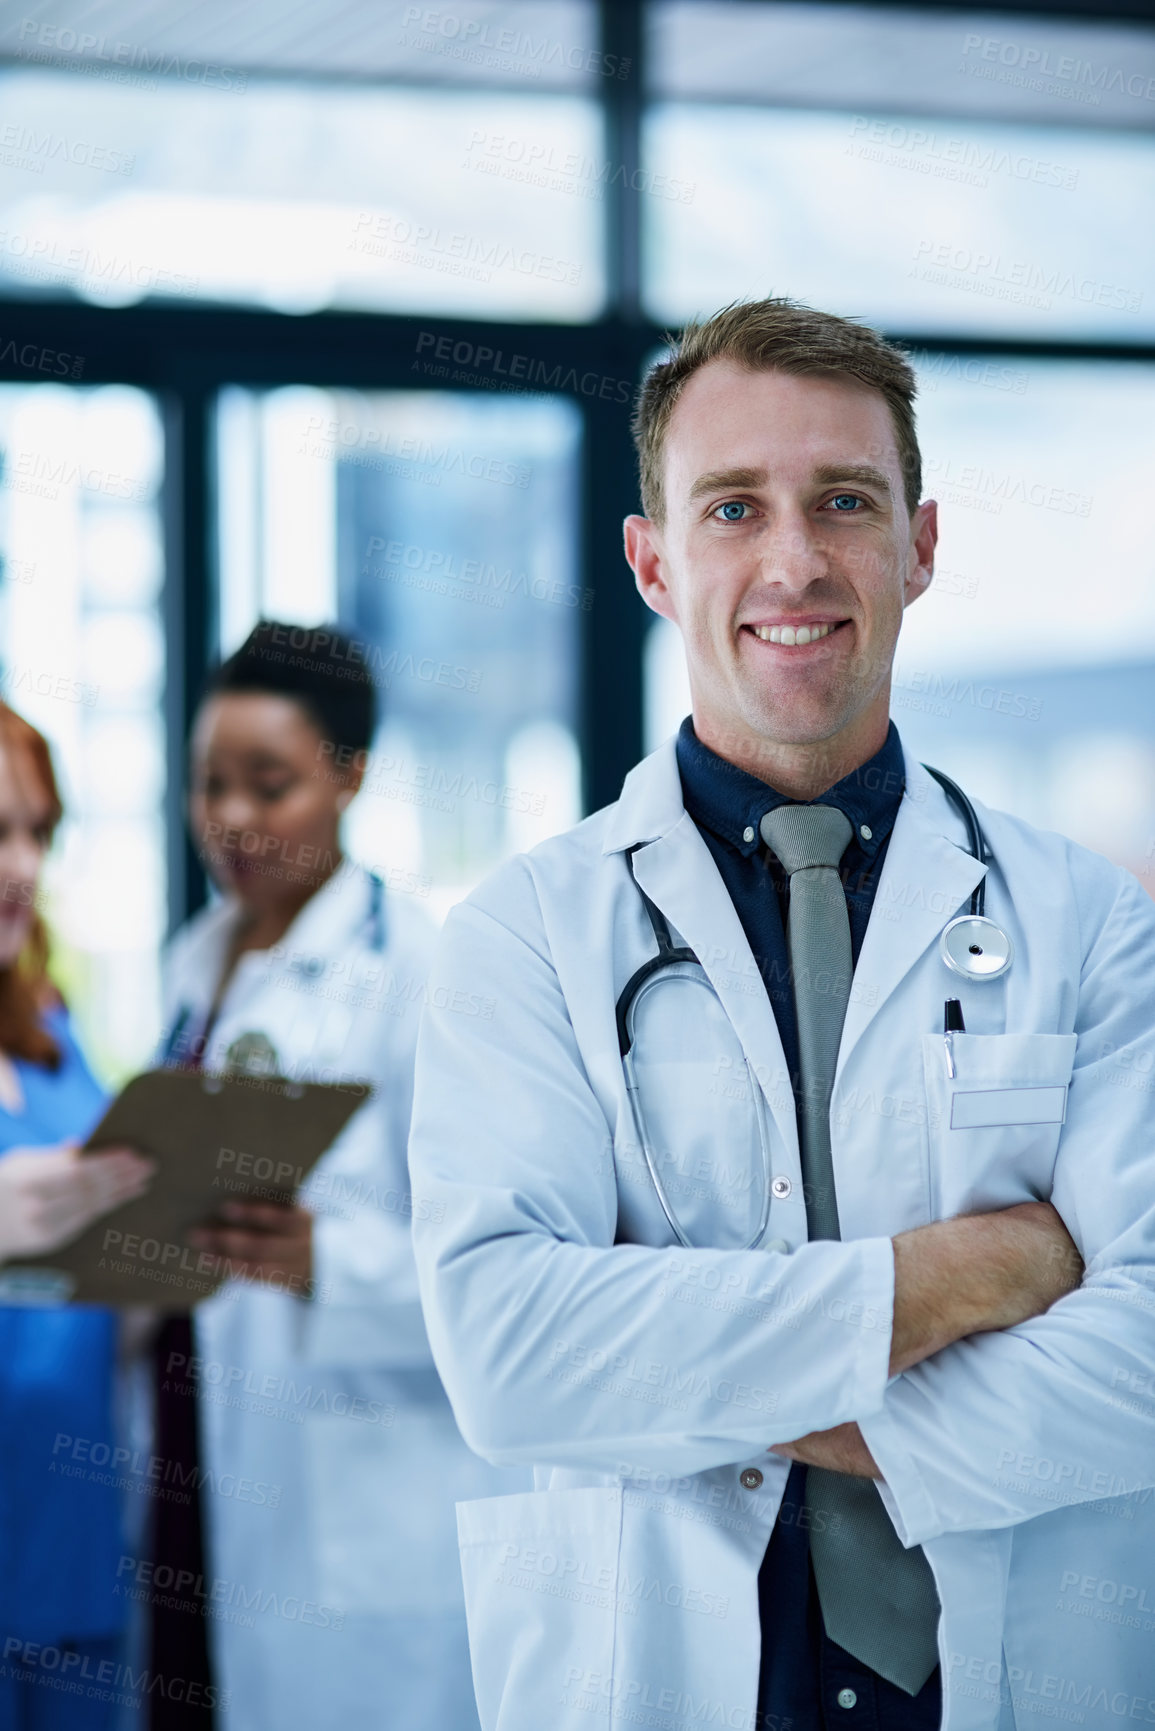 Buy stock photo Portrait of a confident young doctor working in a hospital